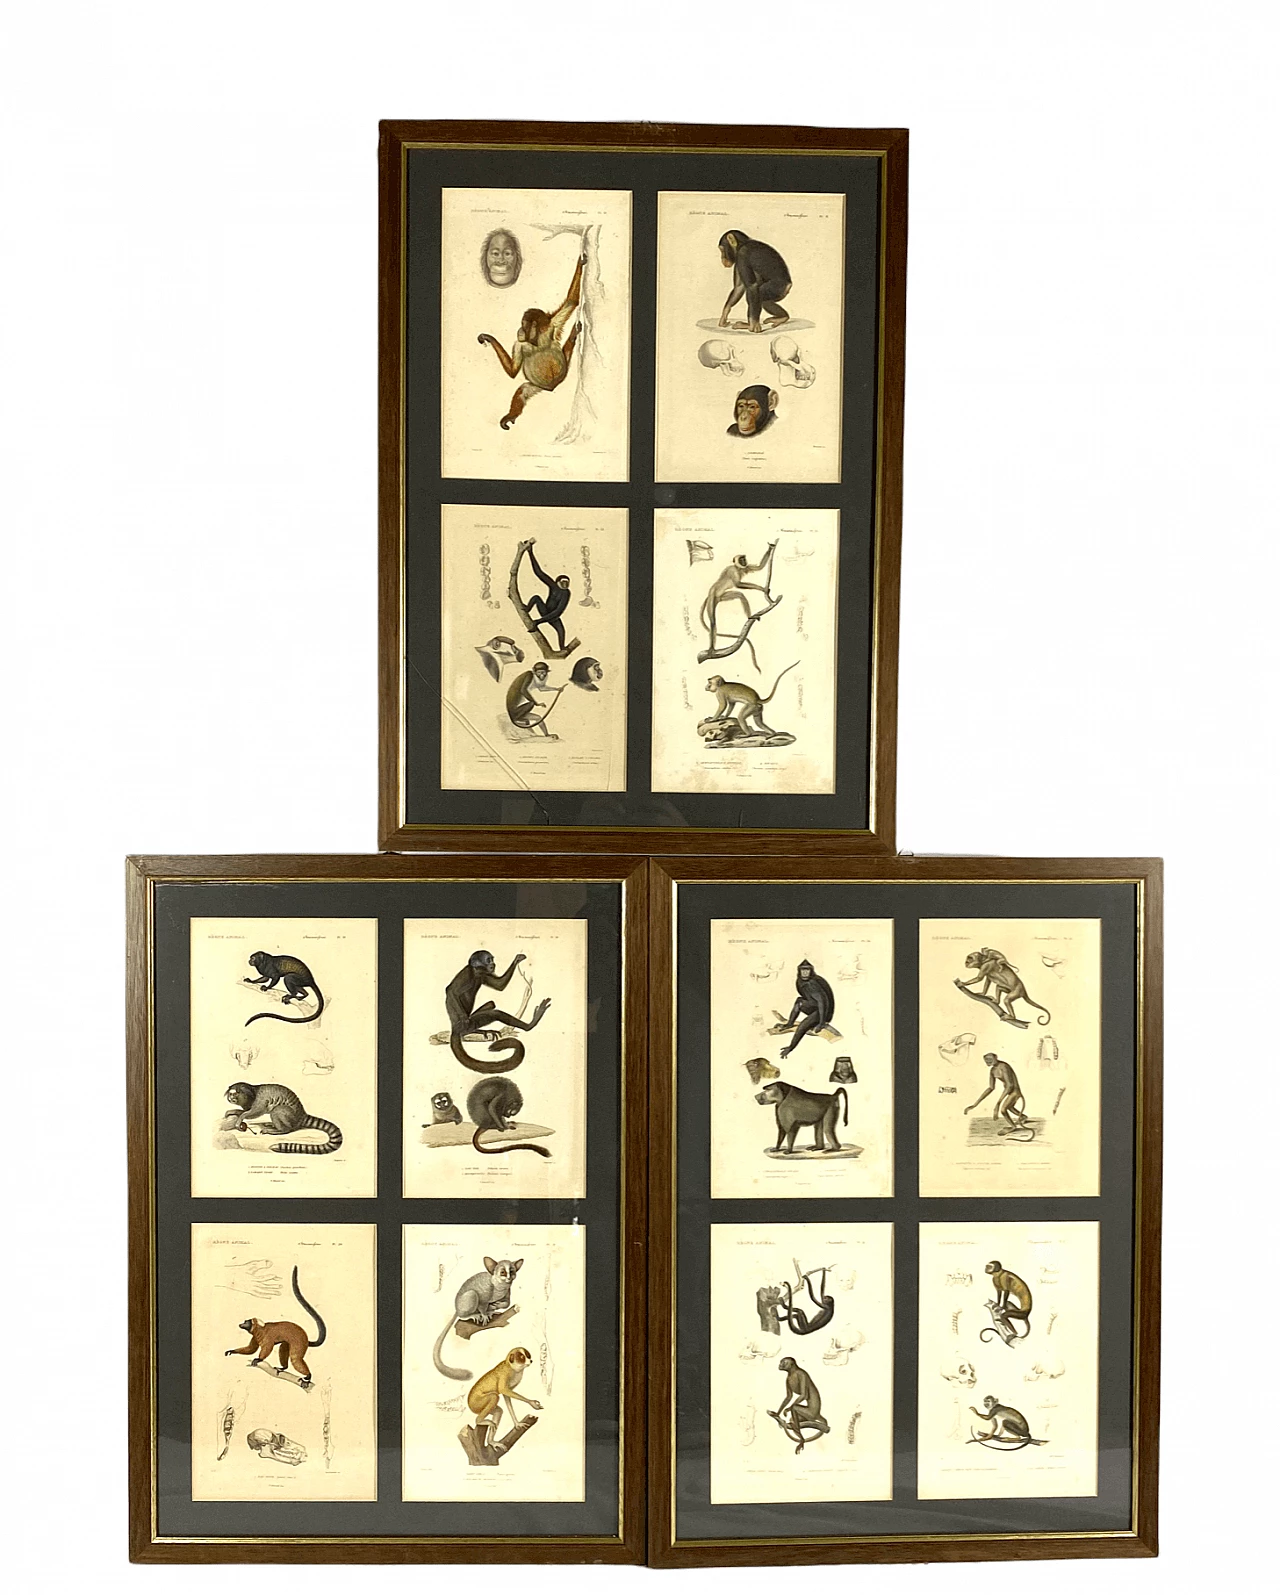 3 Framed panels with 12 engravings from "Le Règne Animal" Georges Cuvier, 19th century 1470807